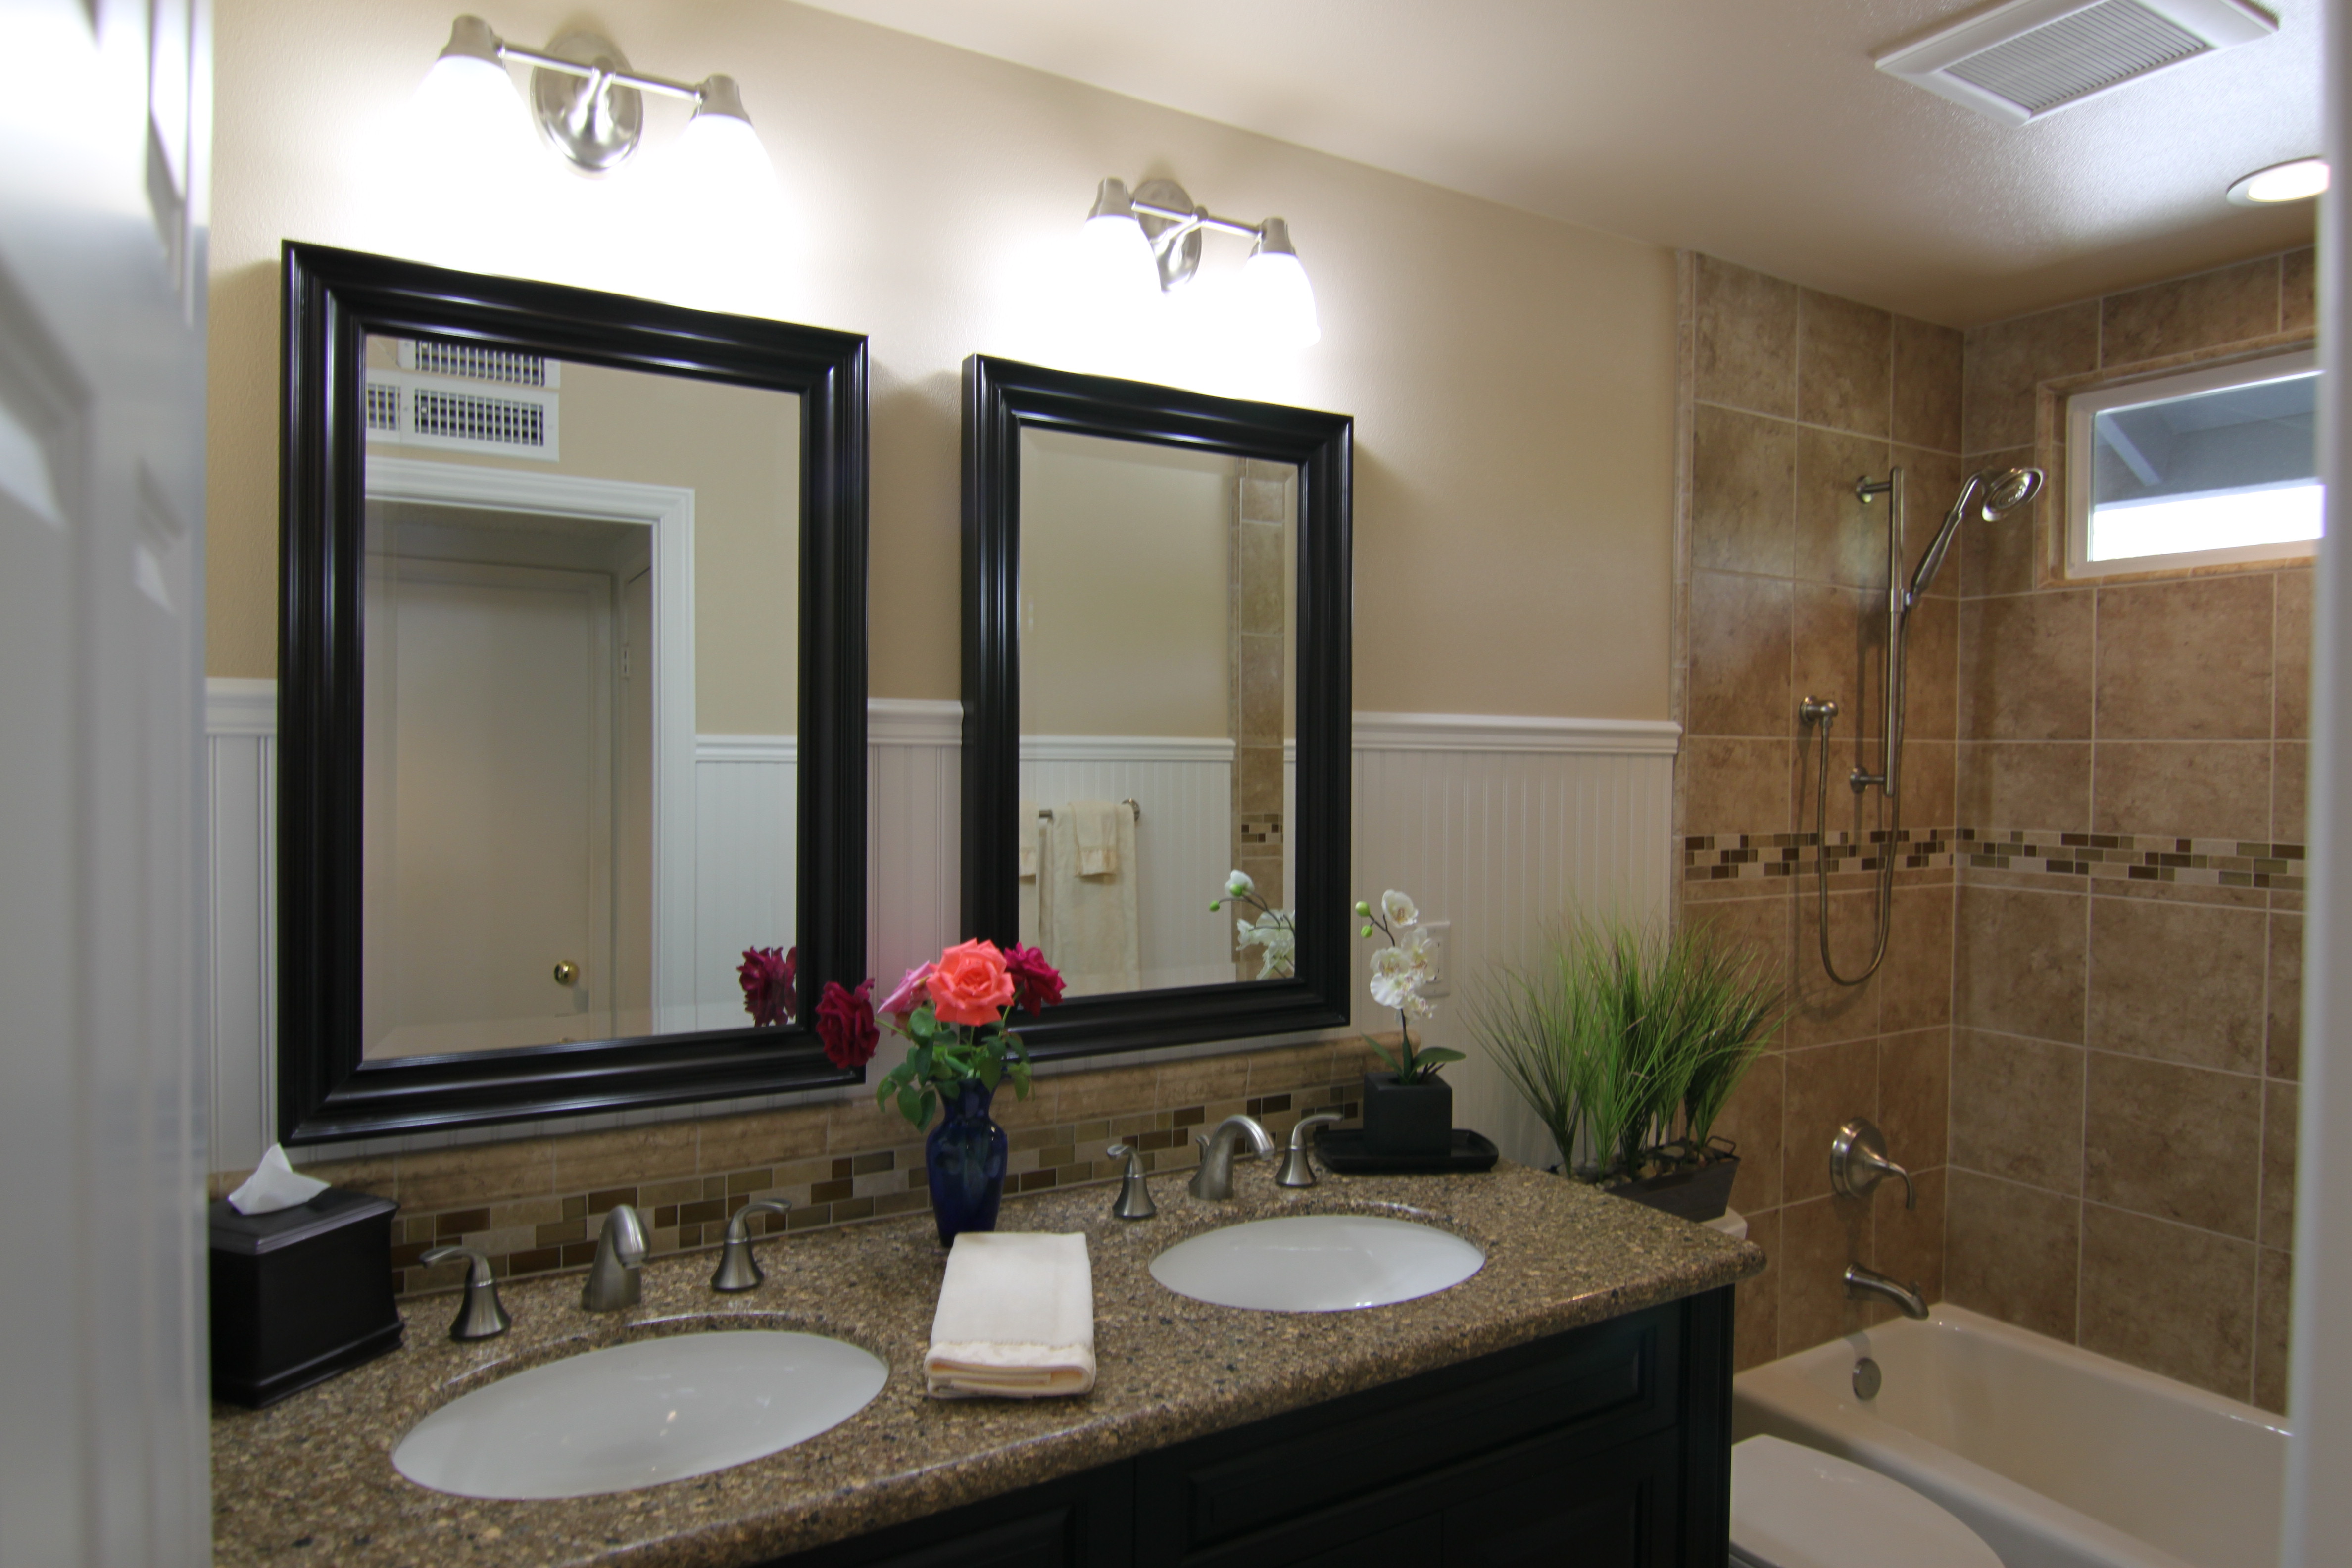 How Much Does A Bathroom Remodel Cost | Bathroom Remodel ...